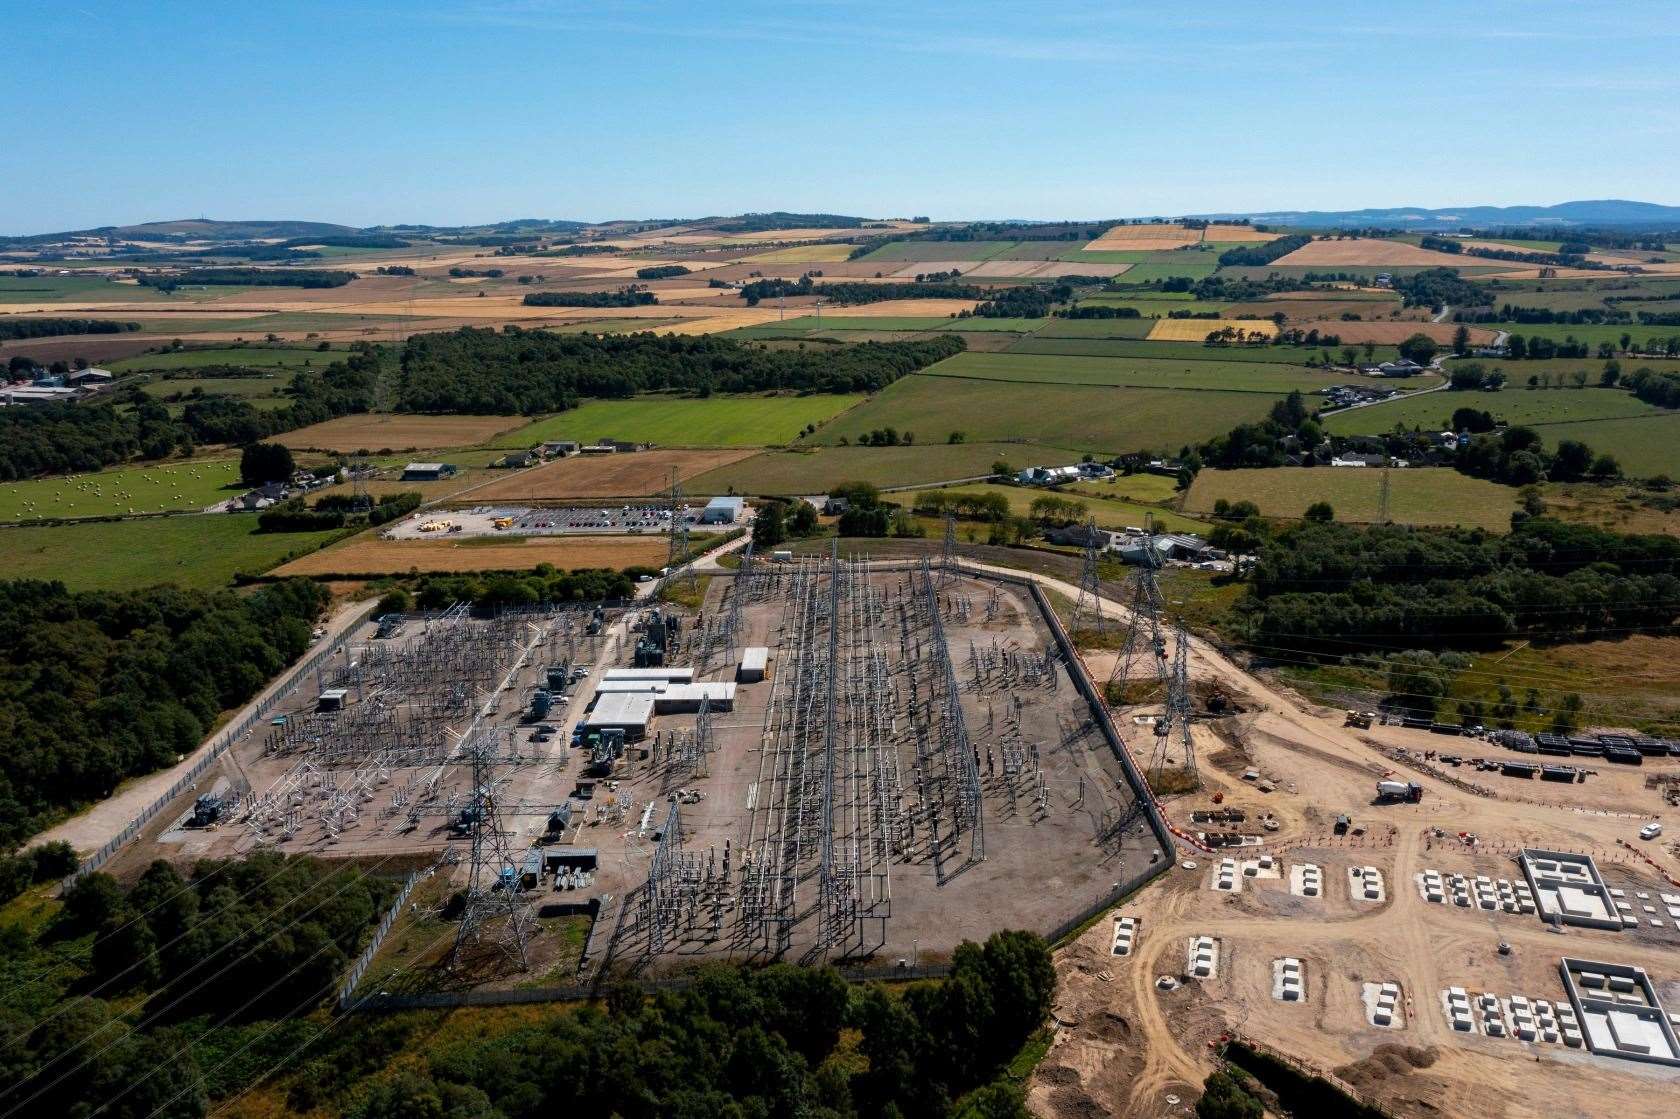 The Kintore Hydrogen project will see major construction at the site, joining the plethora of battery storage applications in the area.